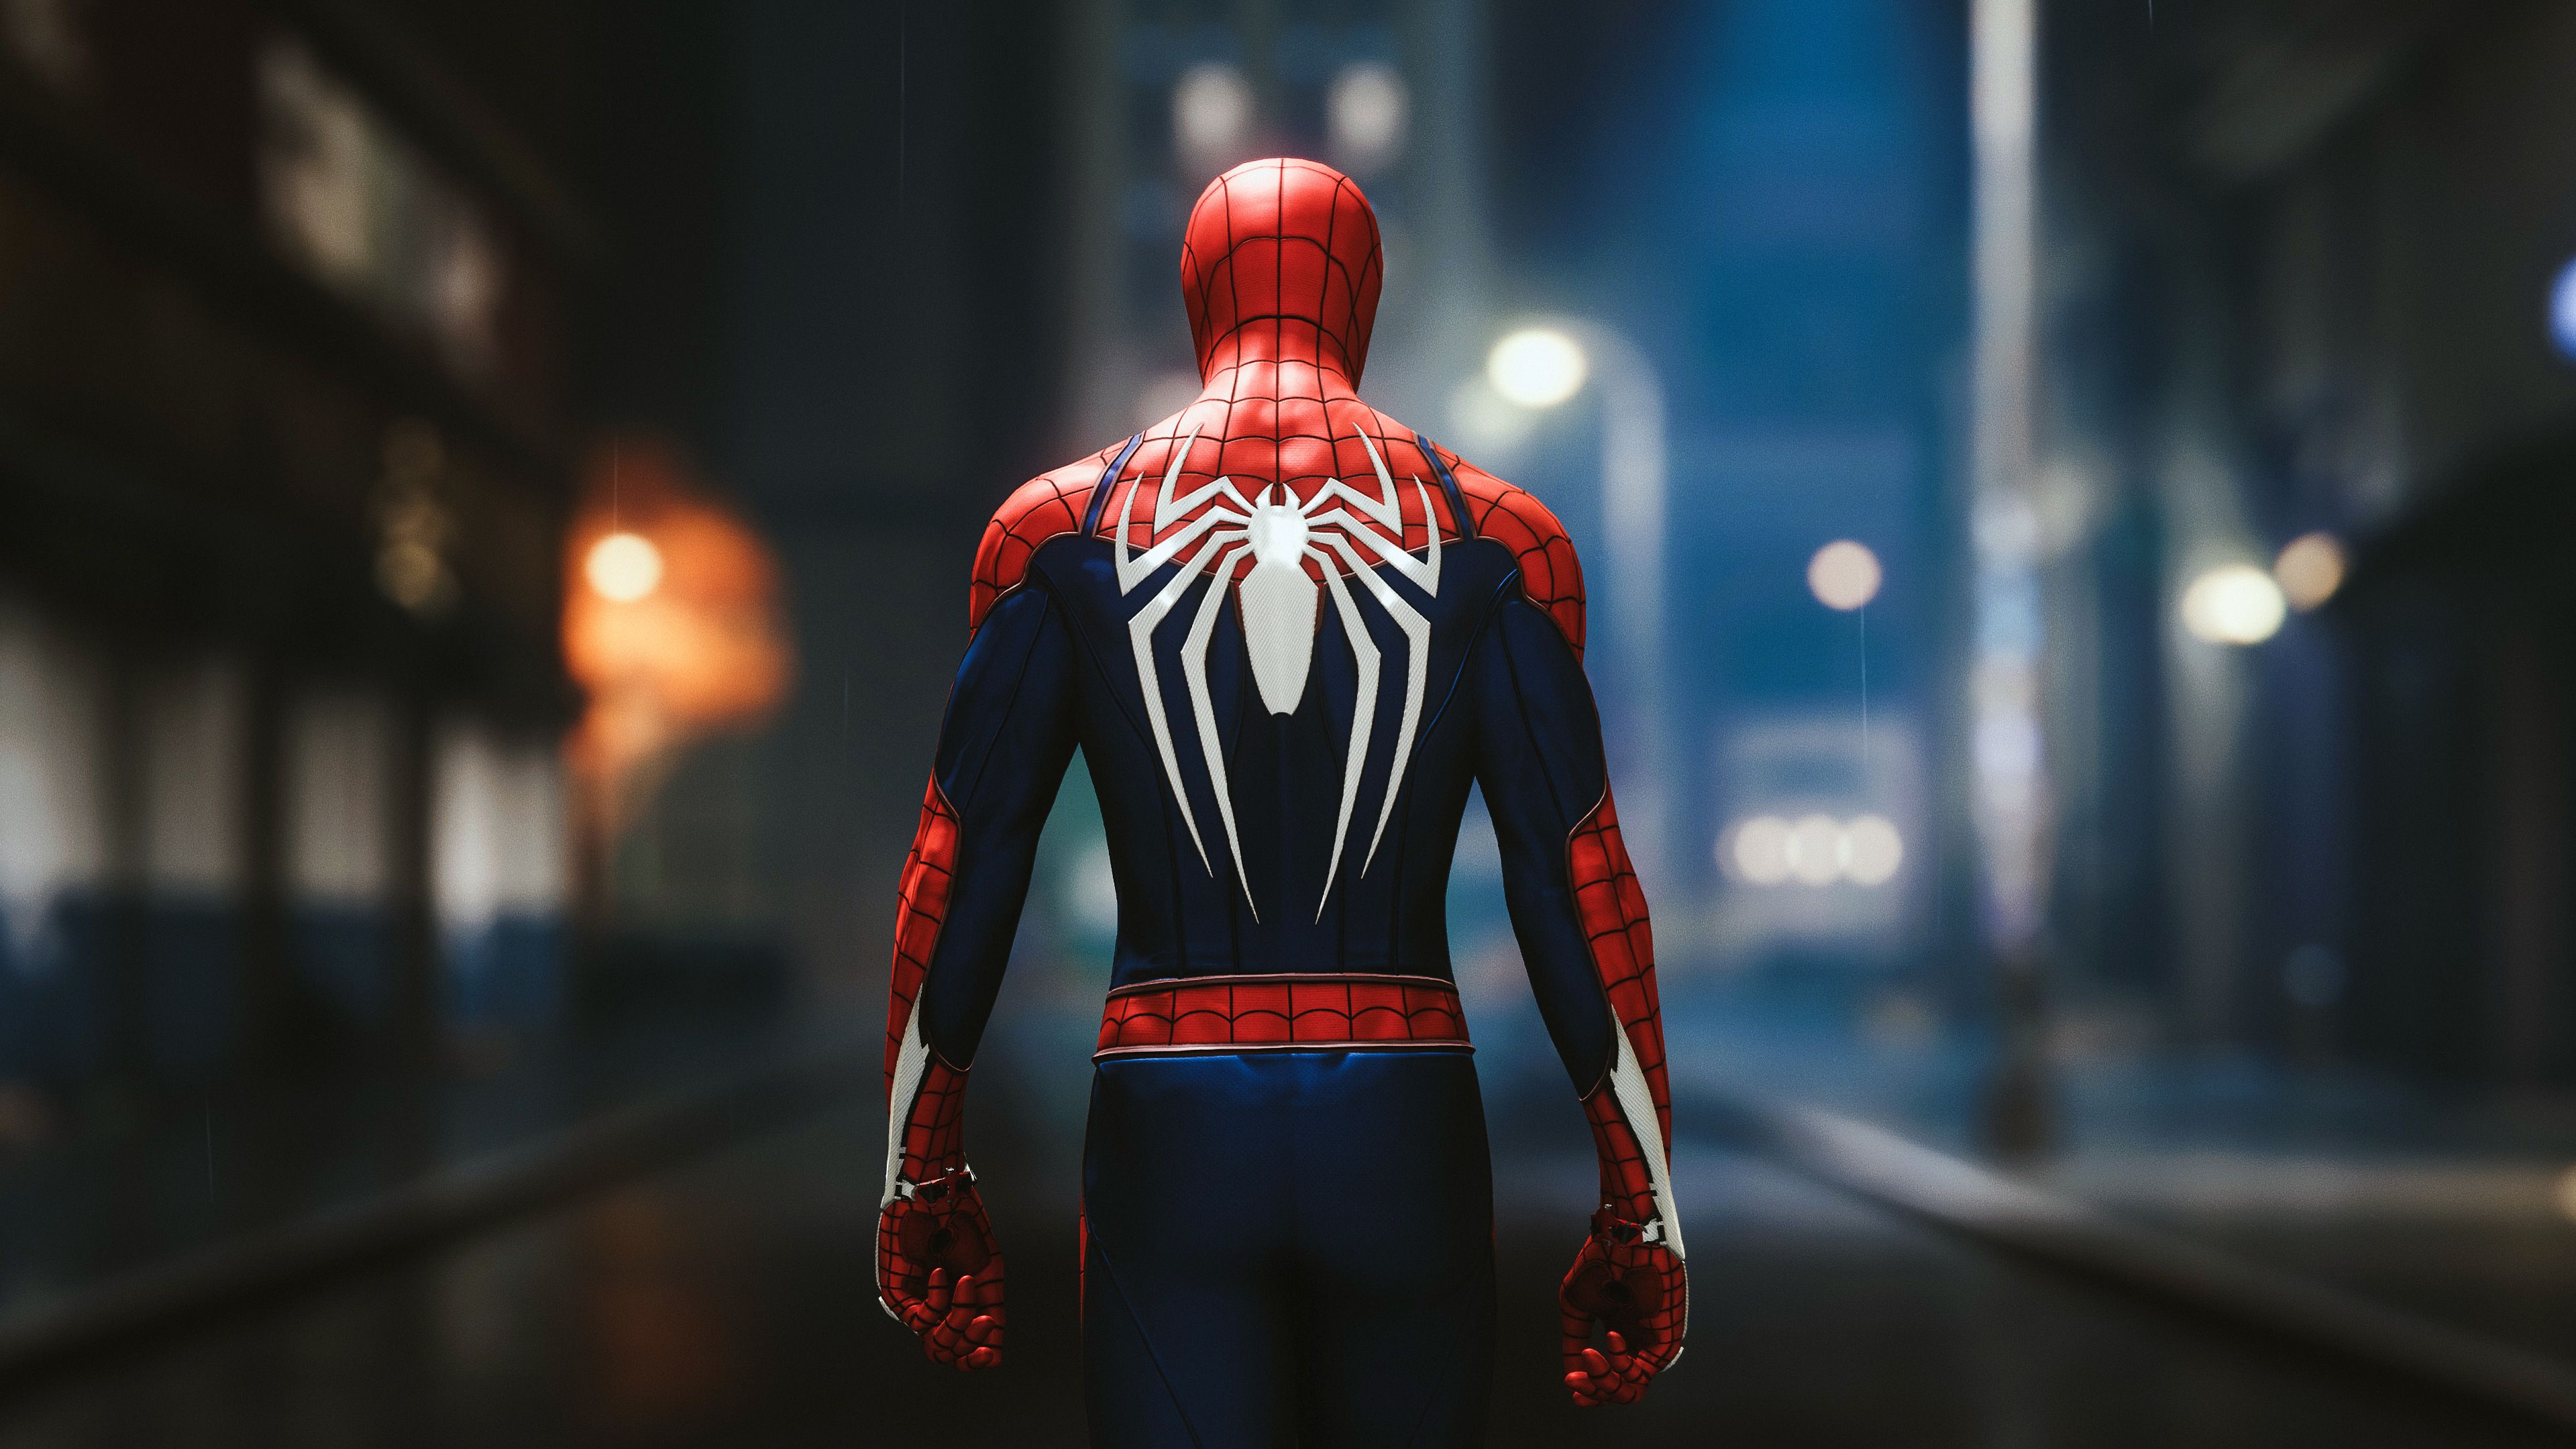 Free download Spider Man PS4 Advanced Suit 4k Ultra HD Wallpaper